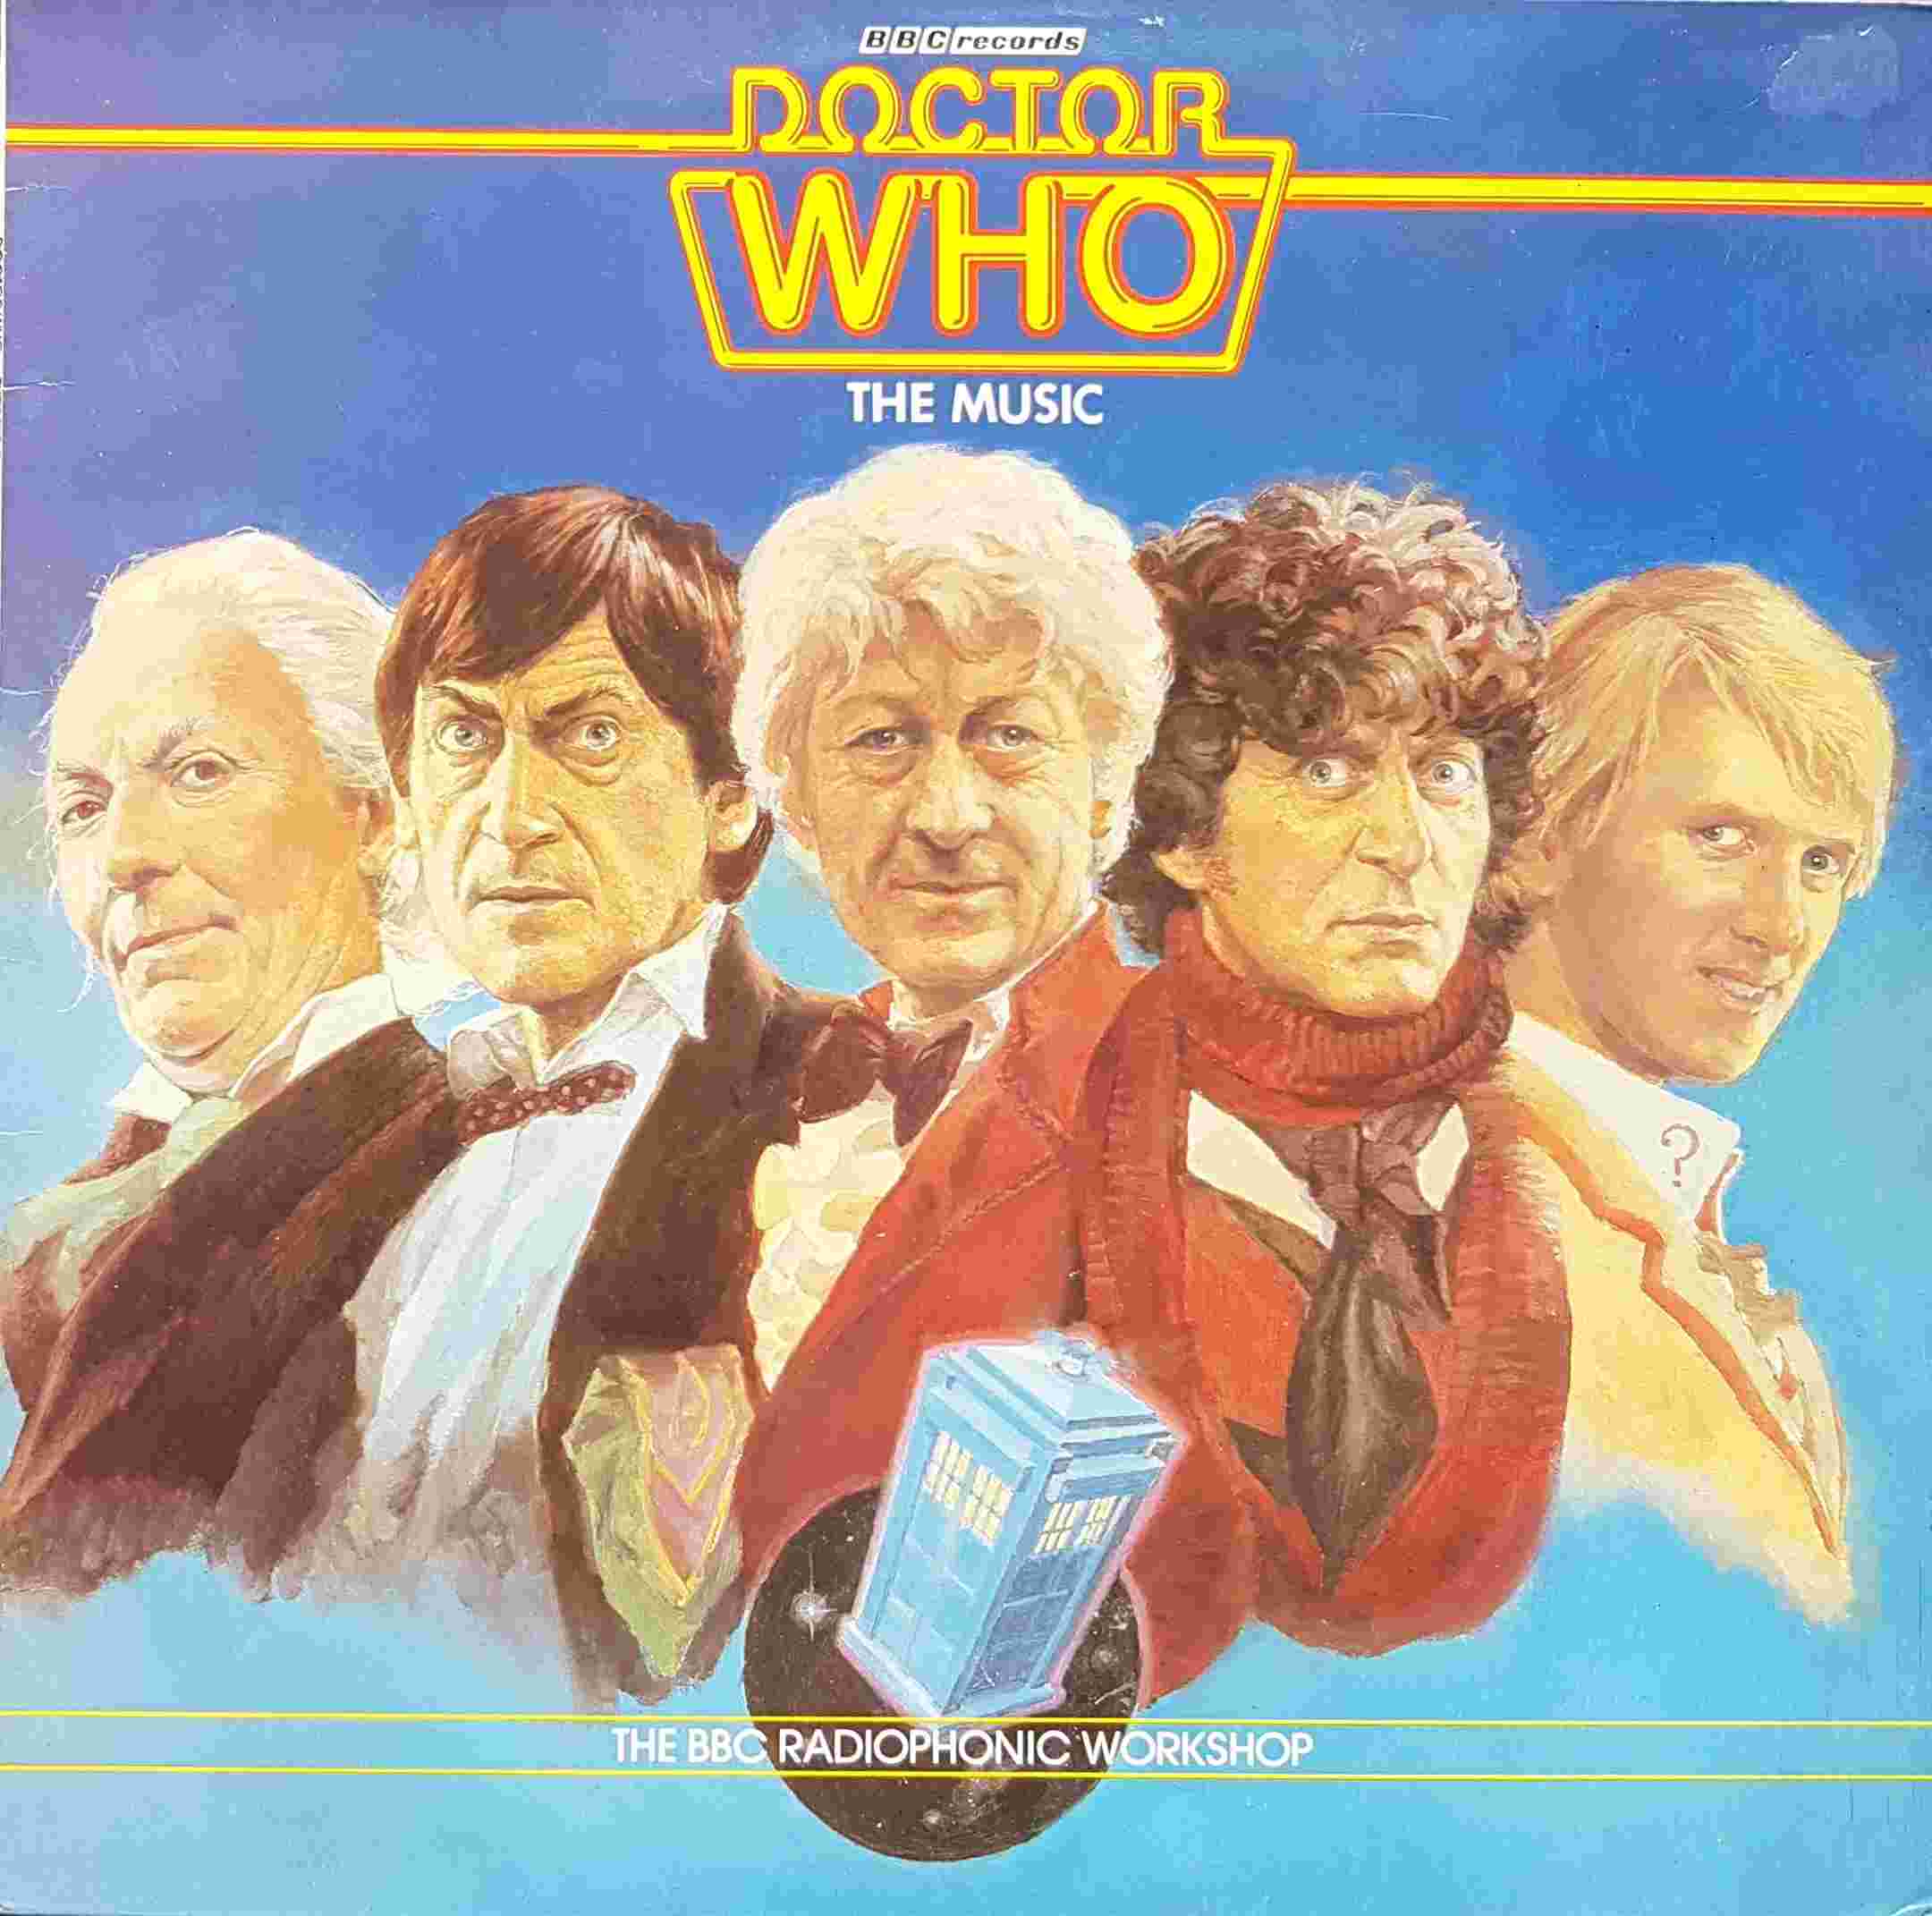 Picture of REH 462 Doctor Who - The music by artist Various from the BBC records and Tapes library